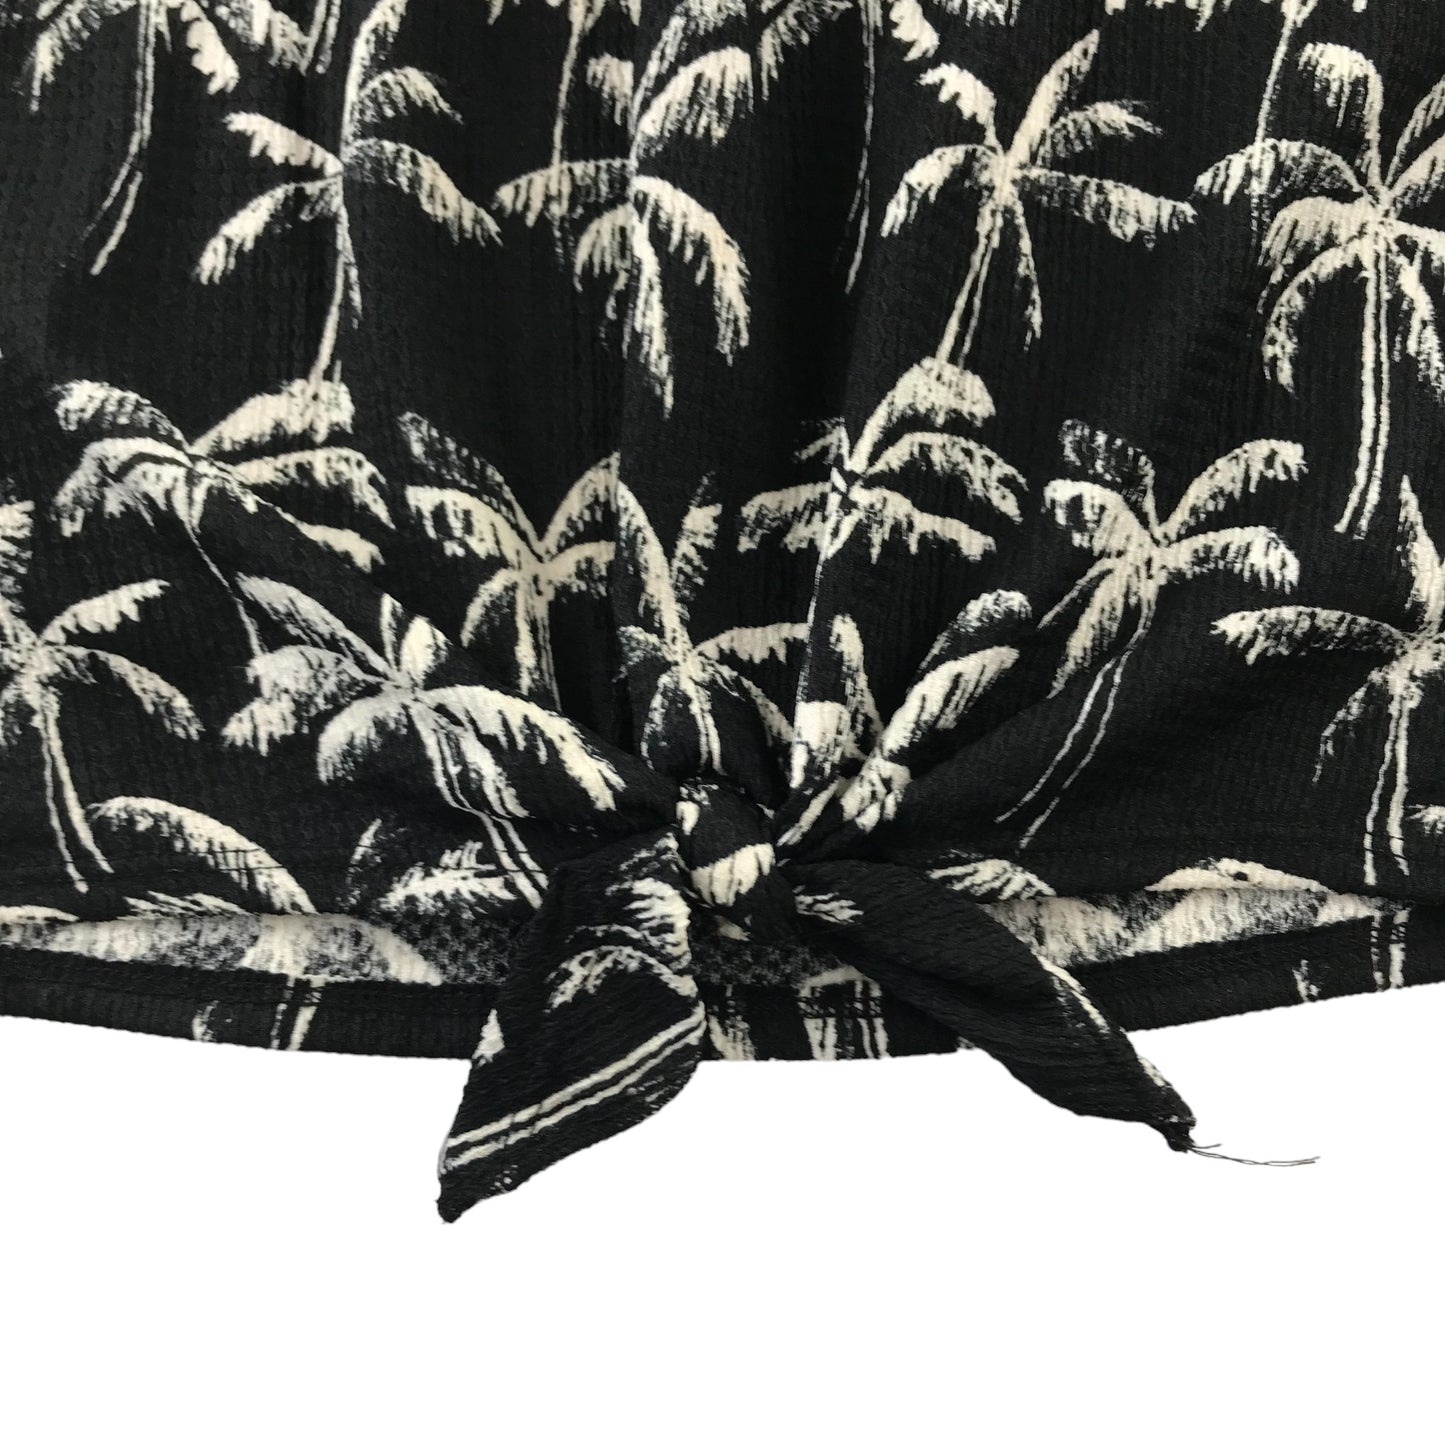 H&M Top and Shorts Set Age 13 Black and White Palm Tree Print